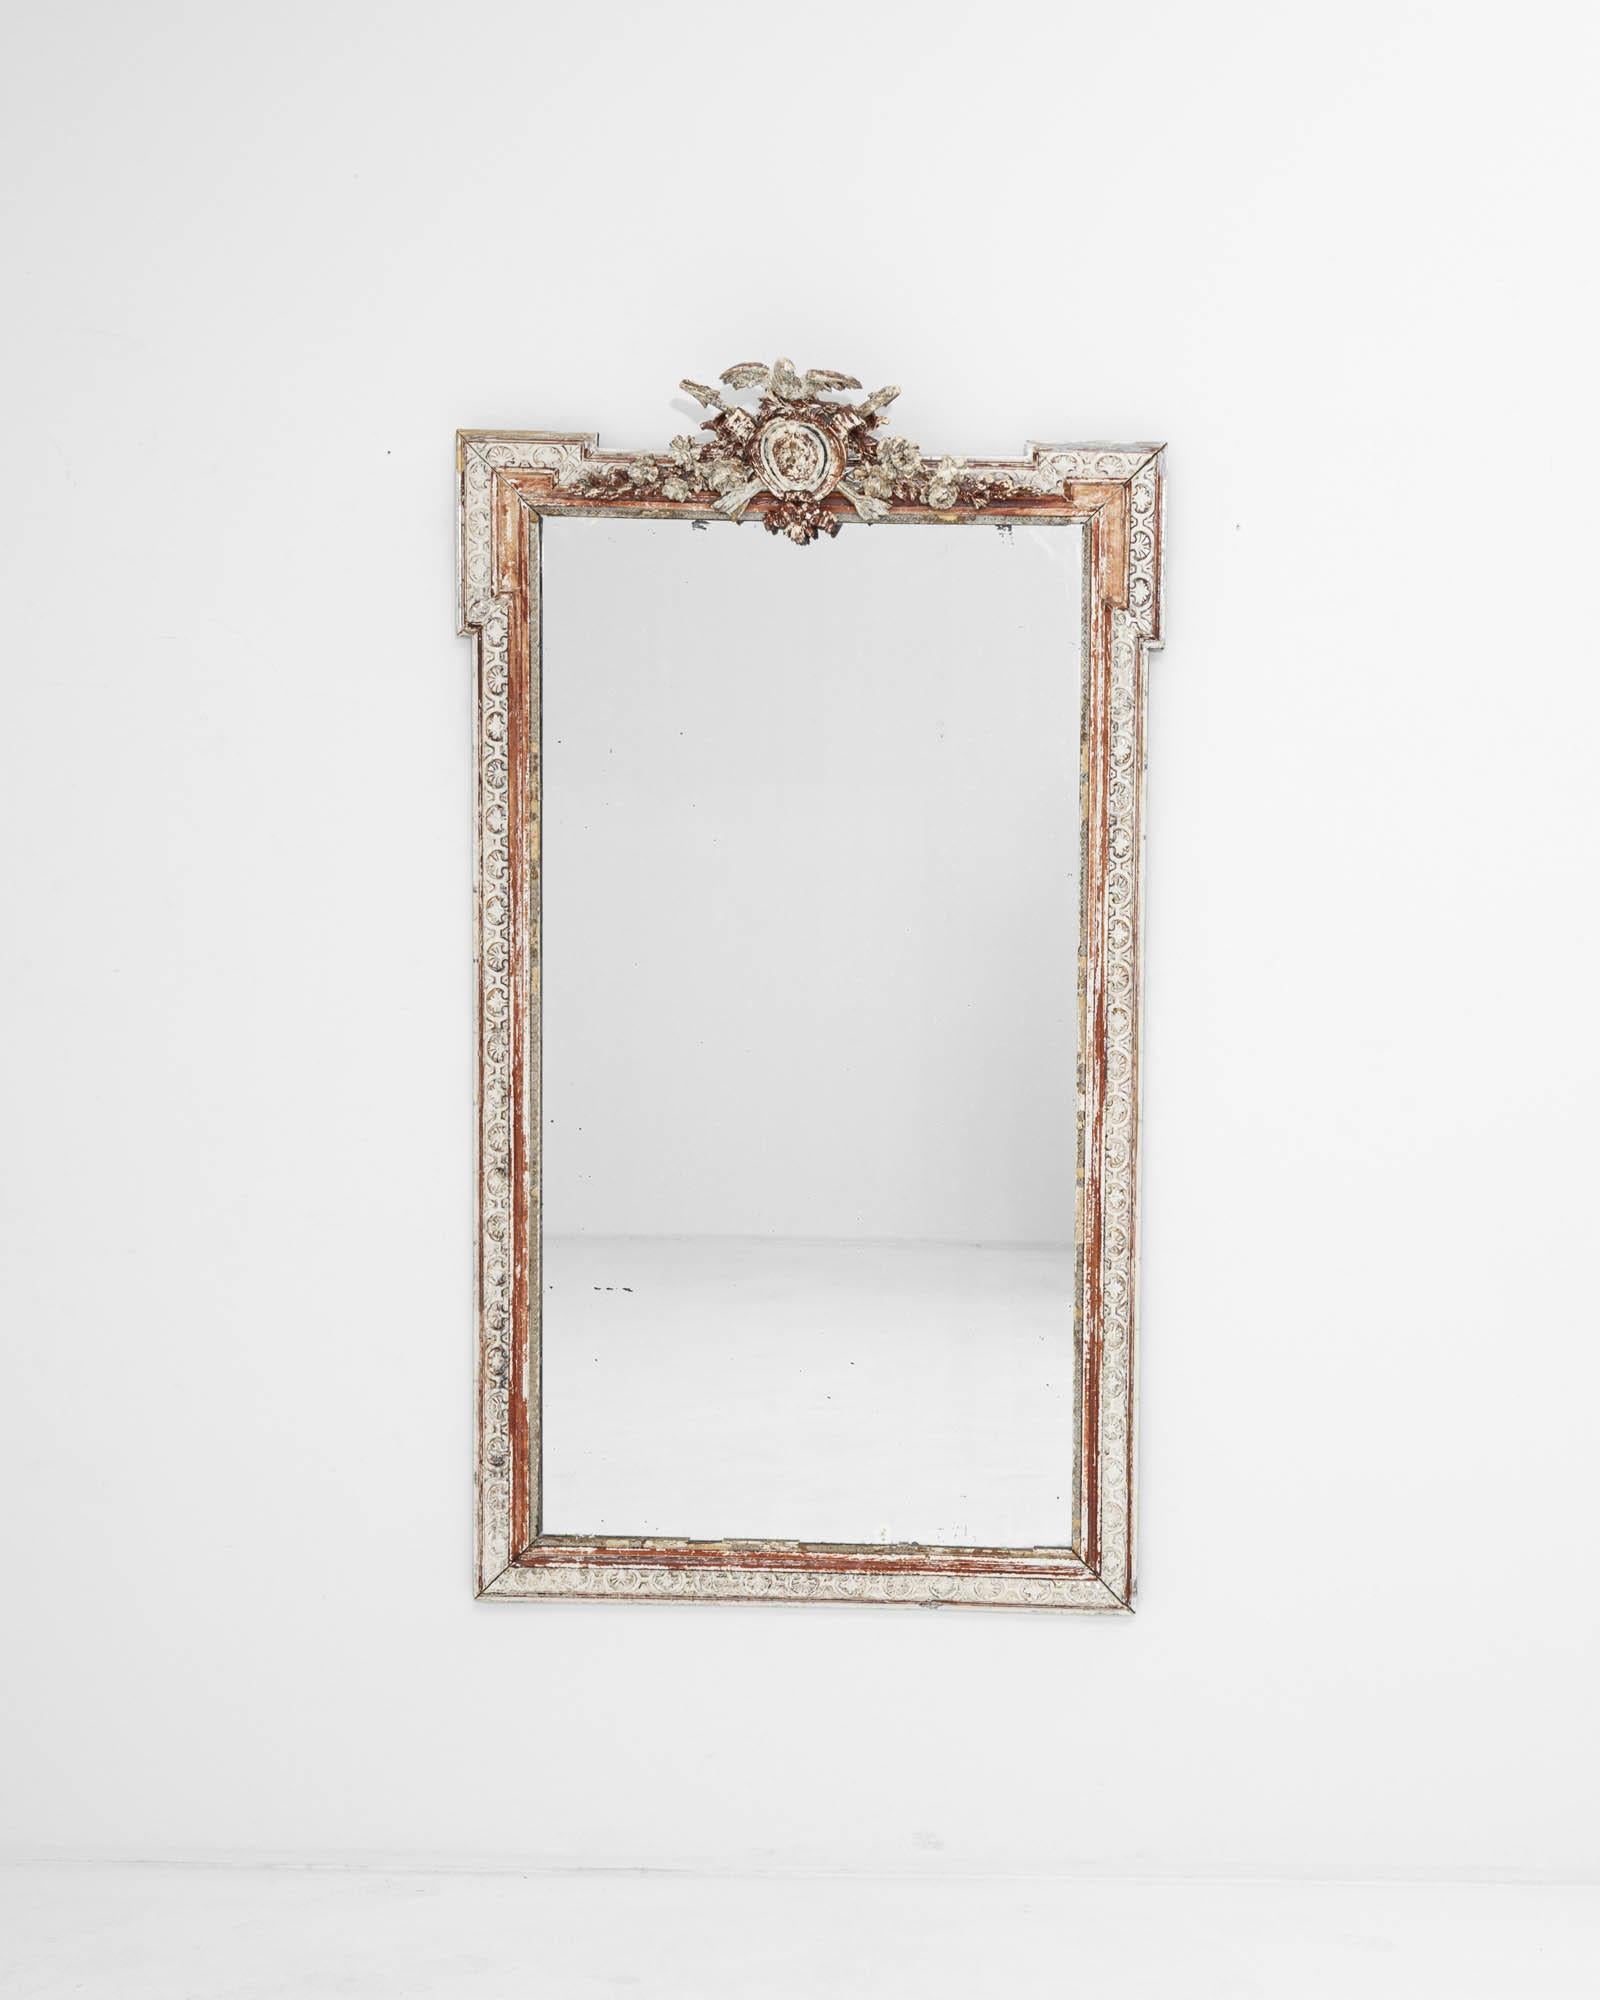 Hand-crafted in the 19th century, this exquisite looking glass flaunts a stunning frame with a distressed white patina that gently accentuates the beautiful carved details, causing the rose hue of the wood to glimmer like gold. The sophisticated